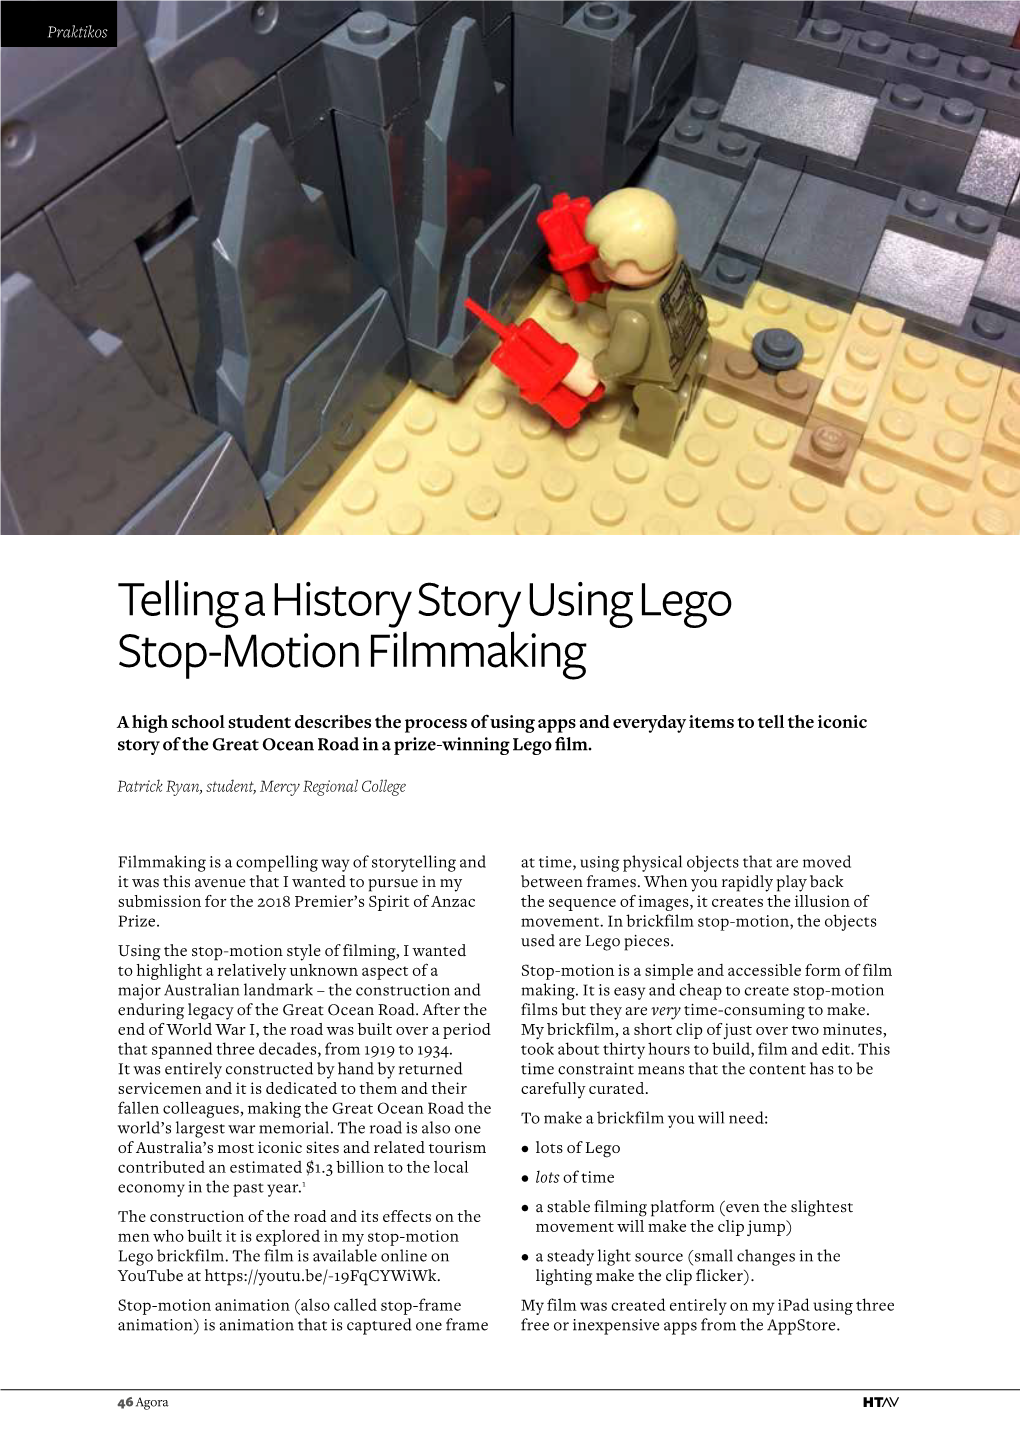 Telling a History Story Using Lego Stop‑Motion Filmmaking